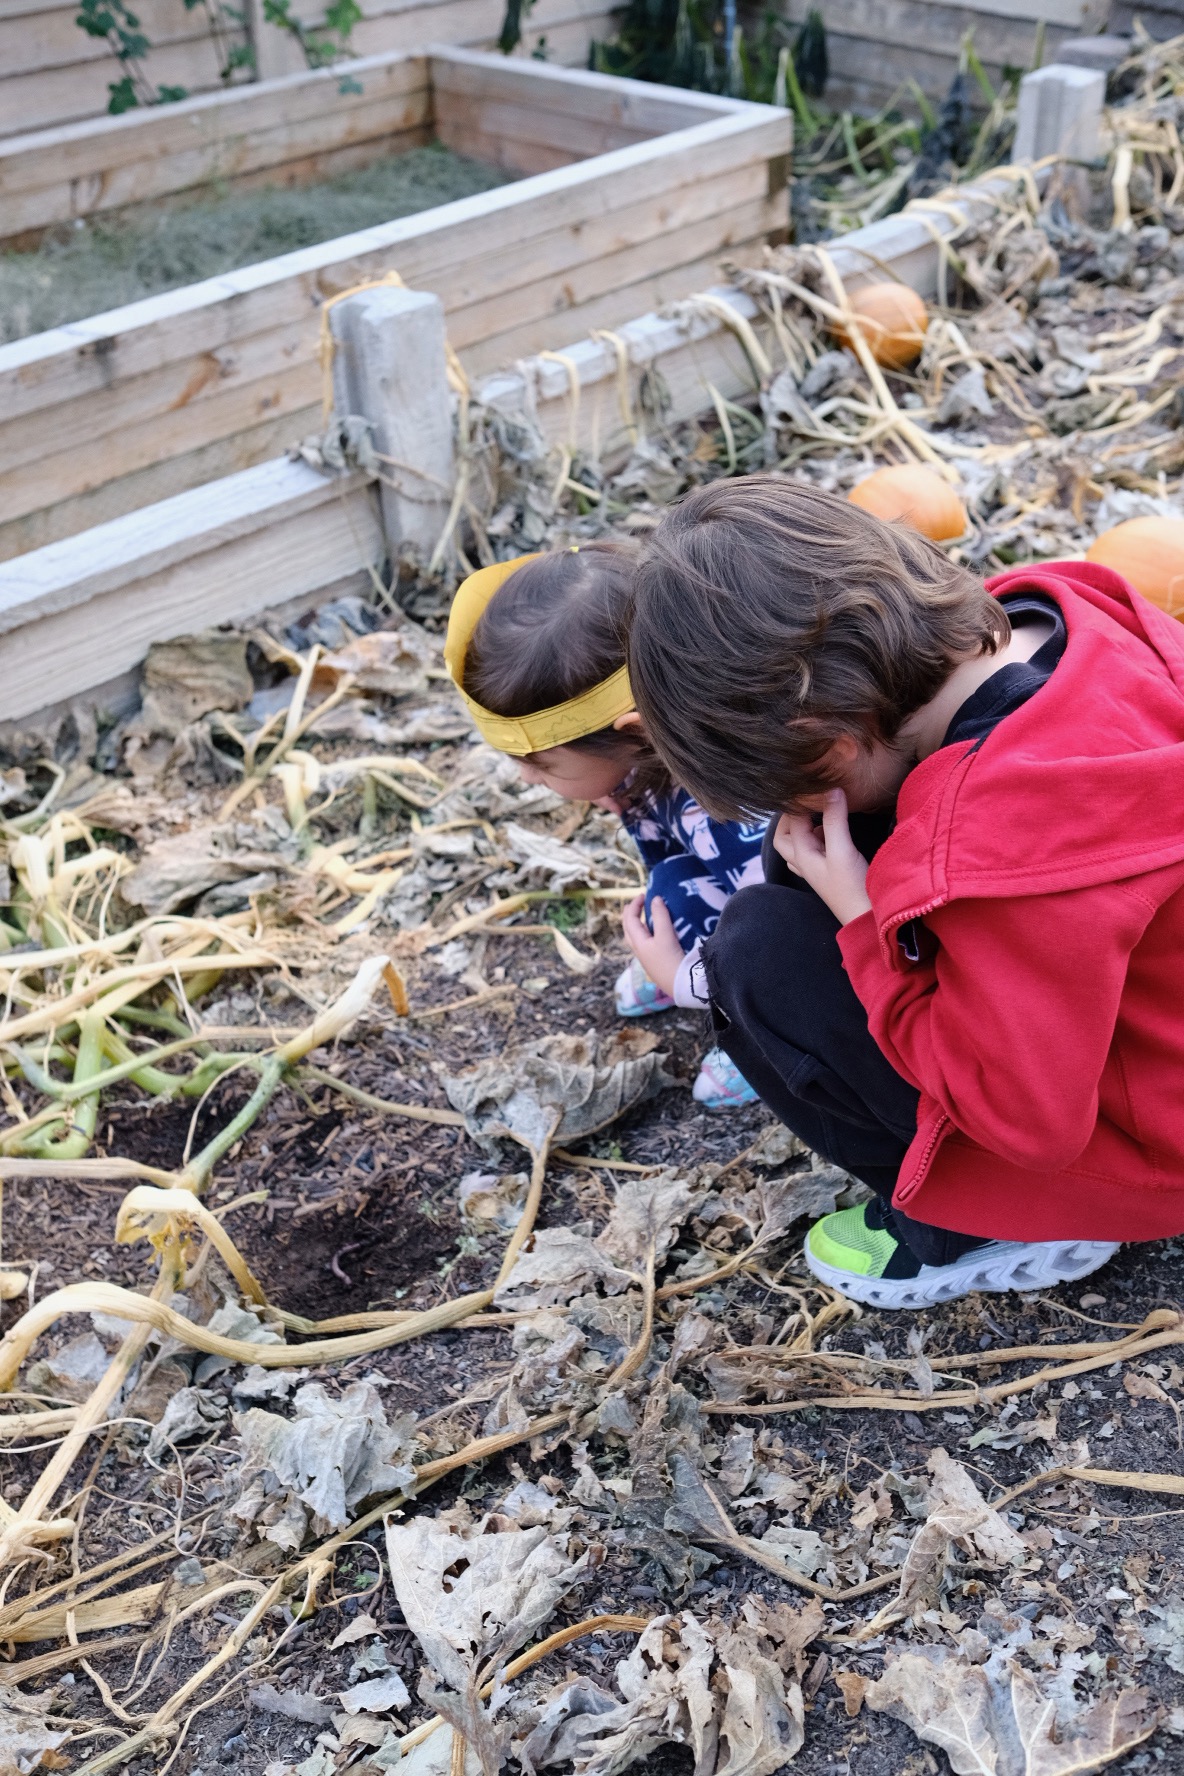 Two kids look at a worm in the dirt.